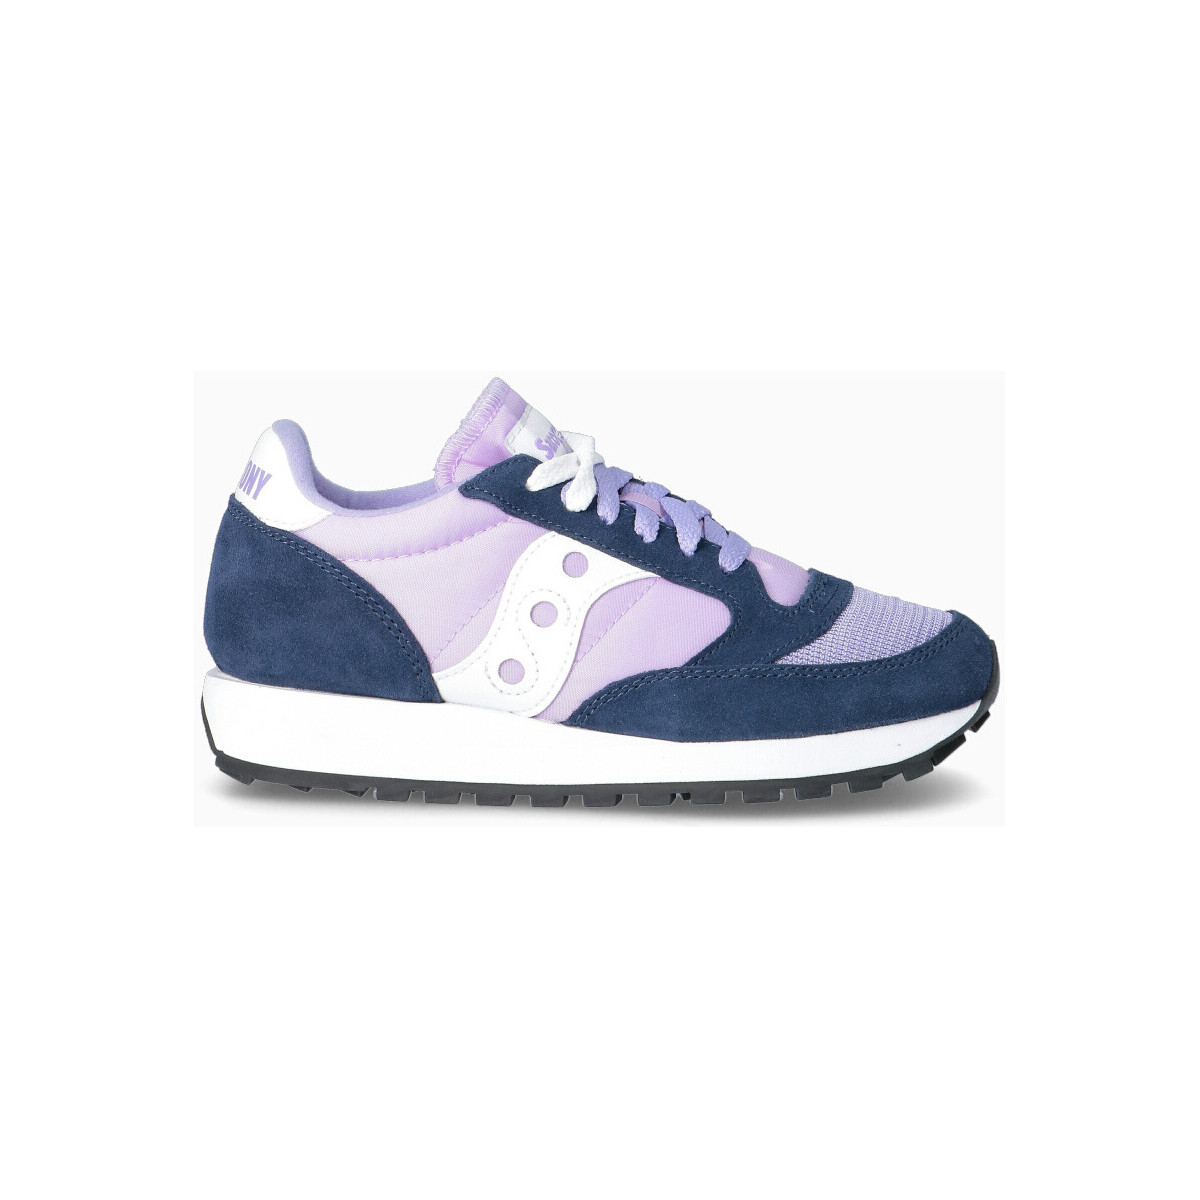 Chaussures Femme Saucony three G9 Control Bodega Sneaker  Donna 